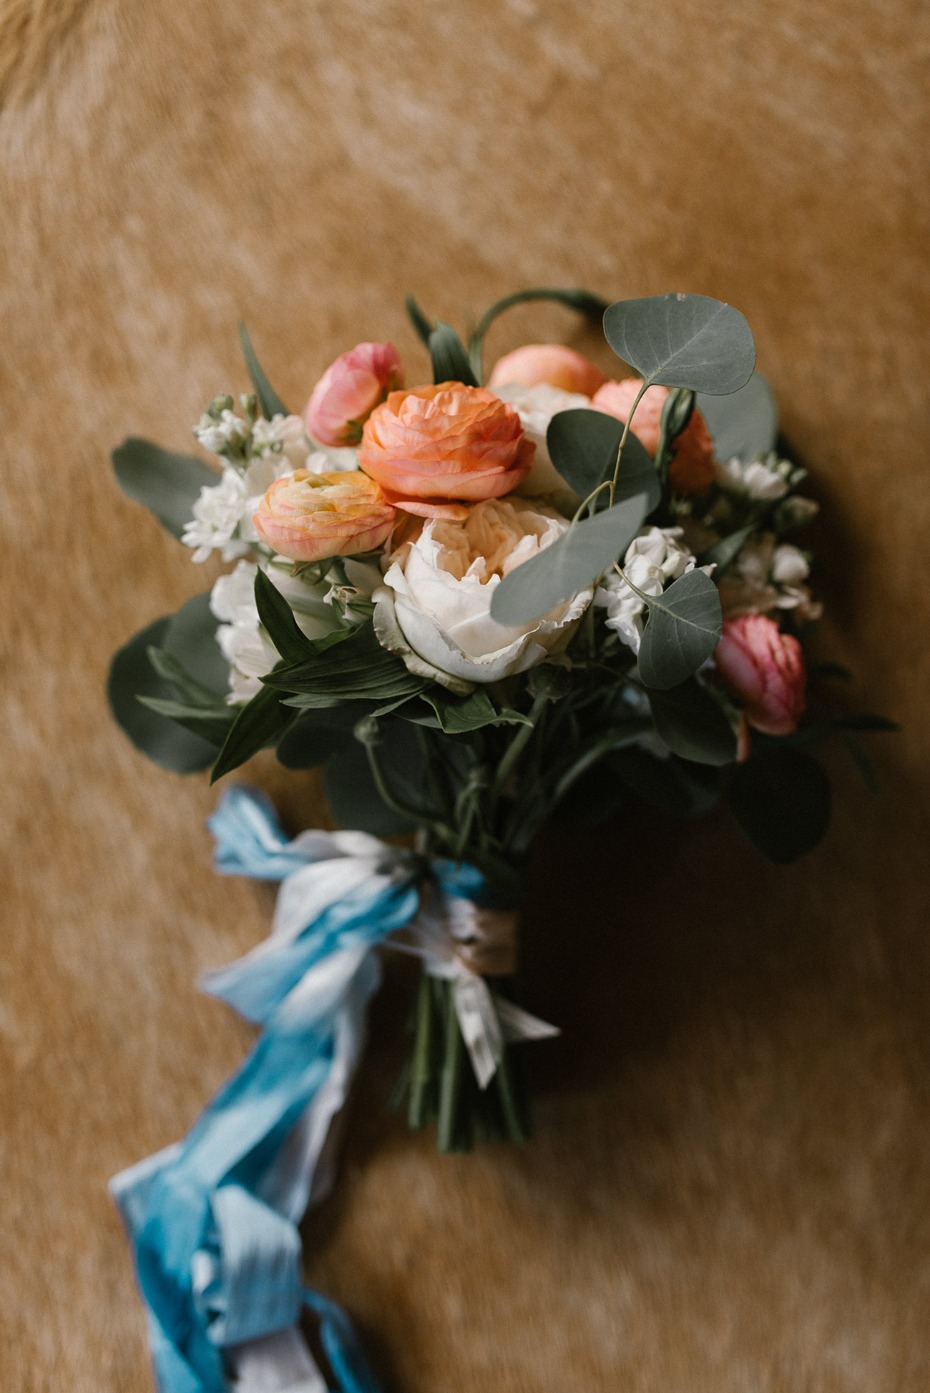 Brides bouquet with blue ribbons